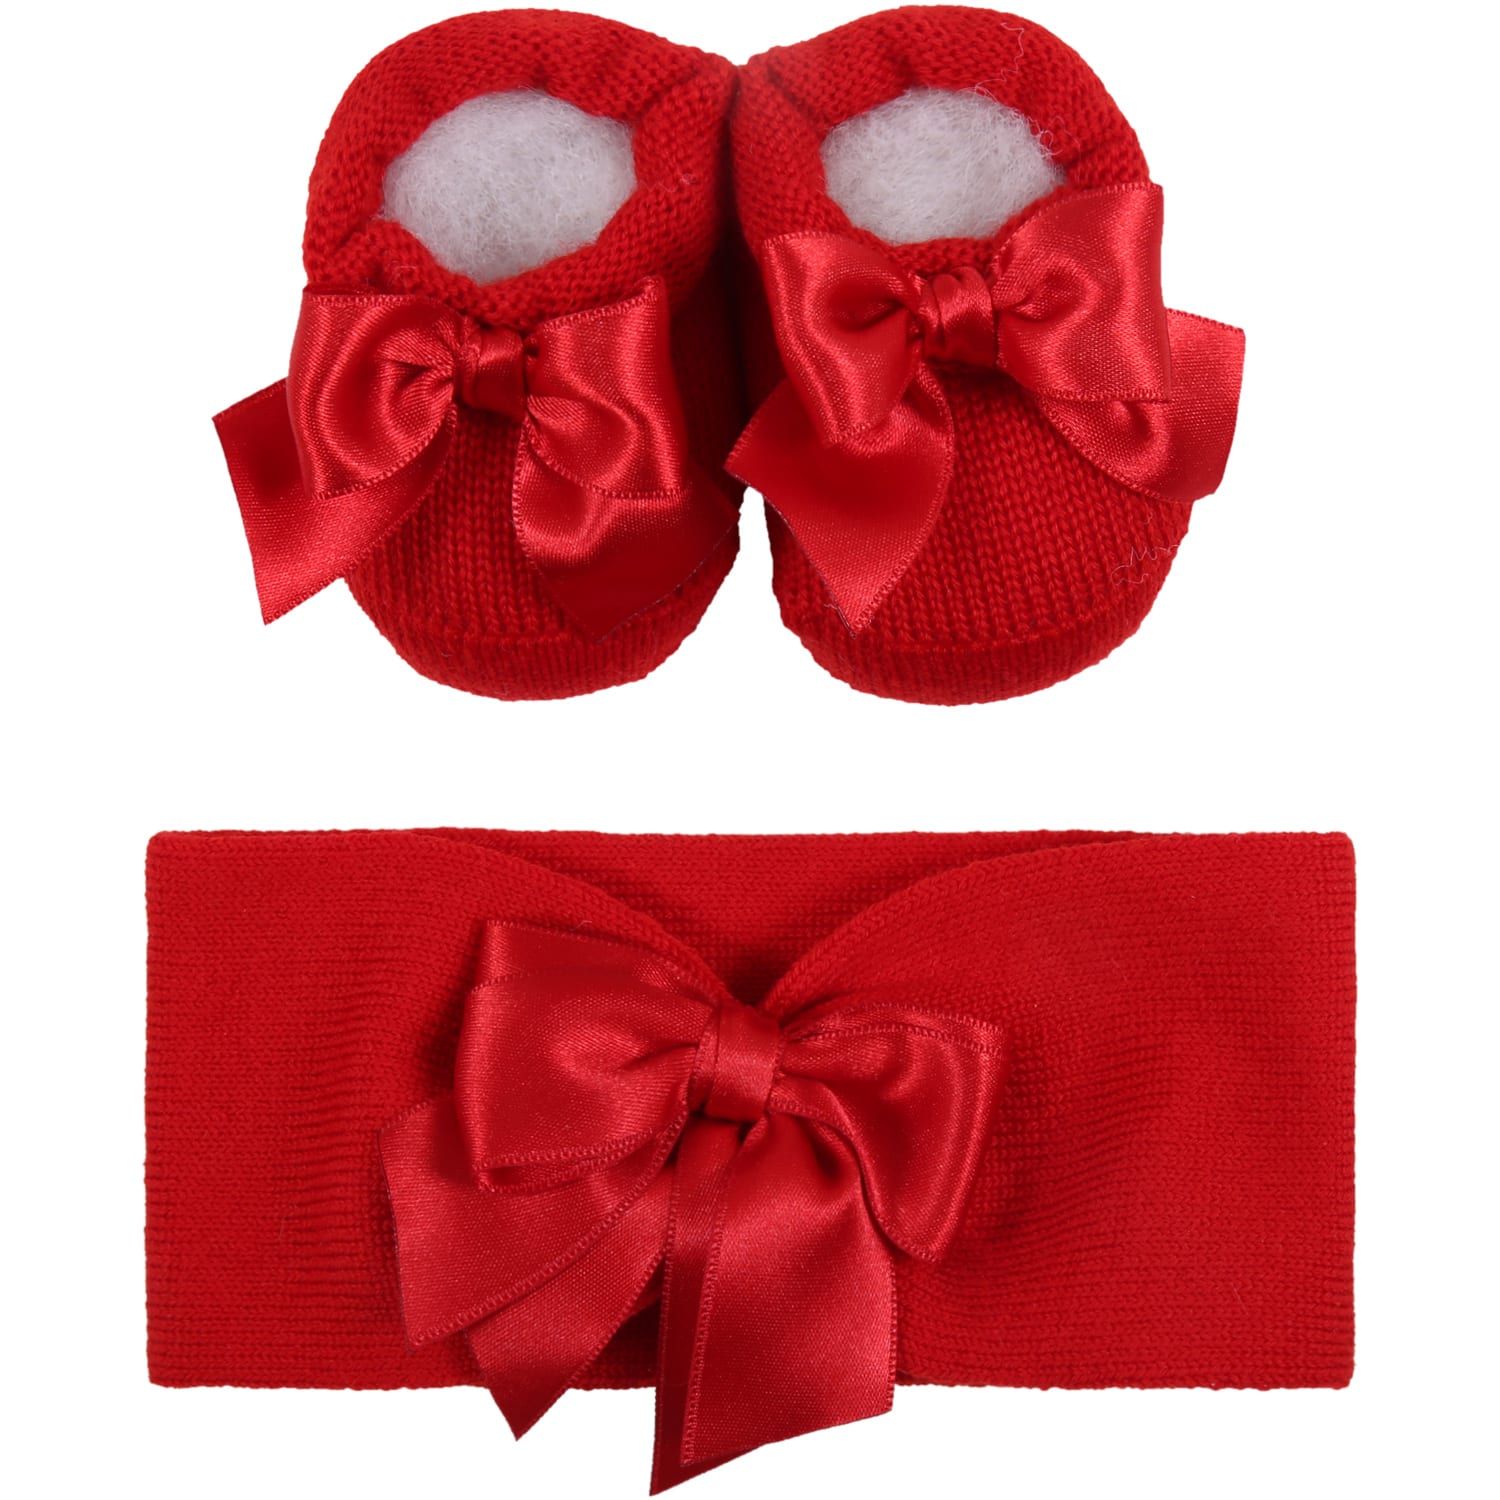 La Perla Red Suit For Baby Girl